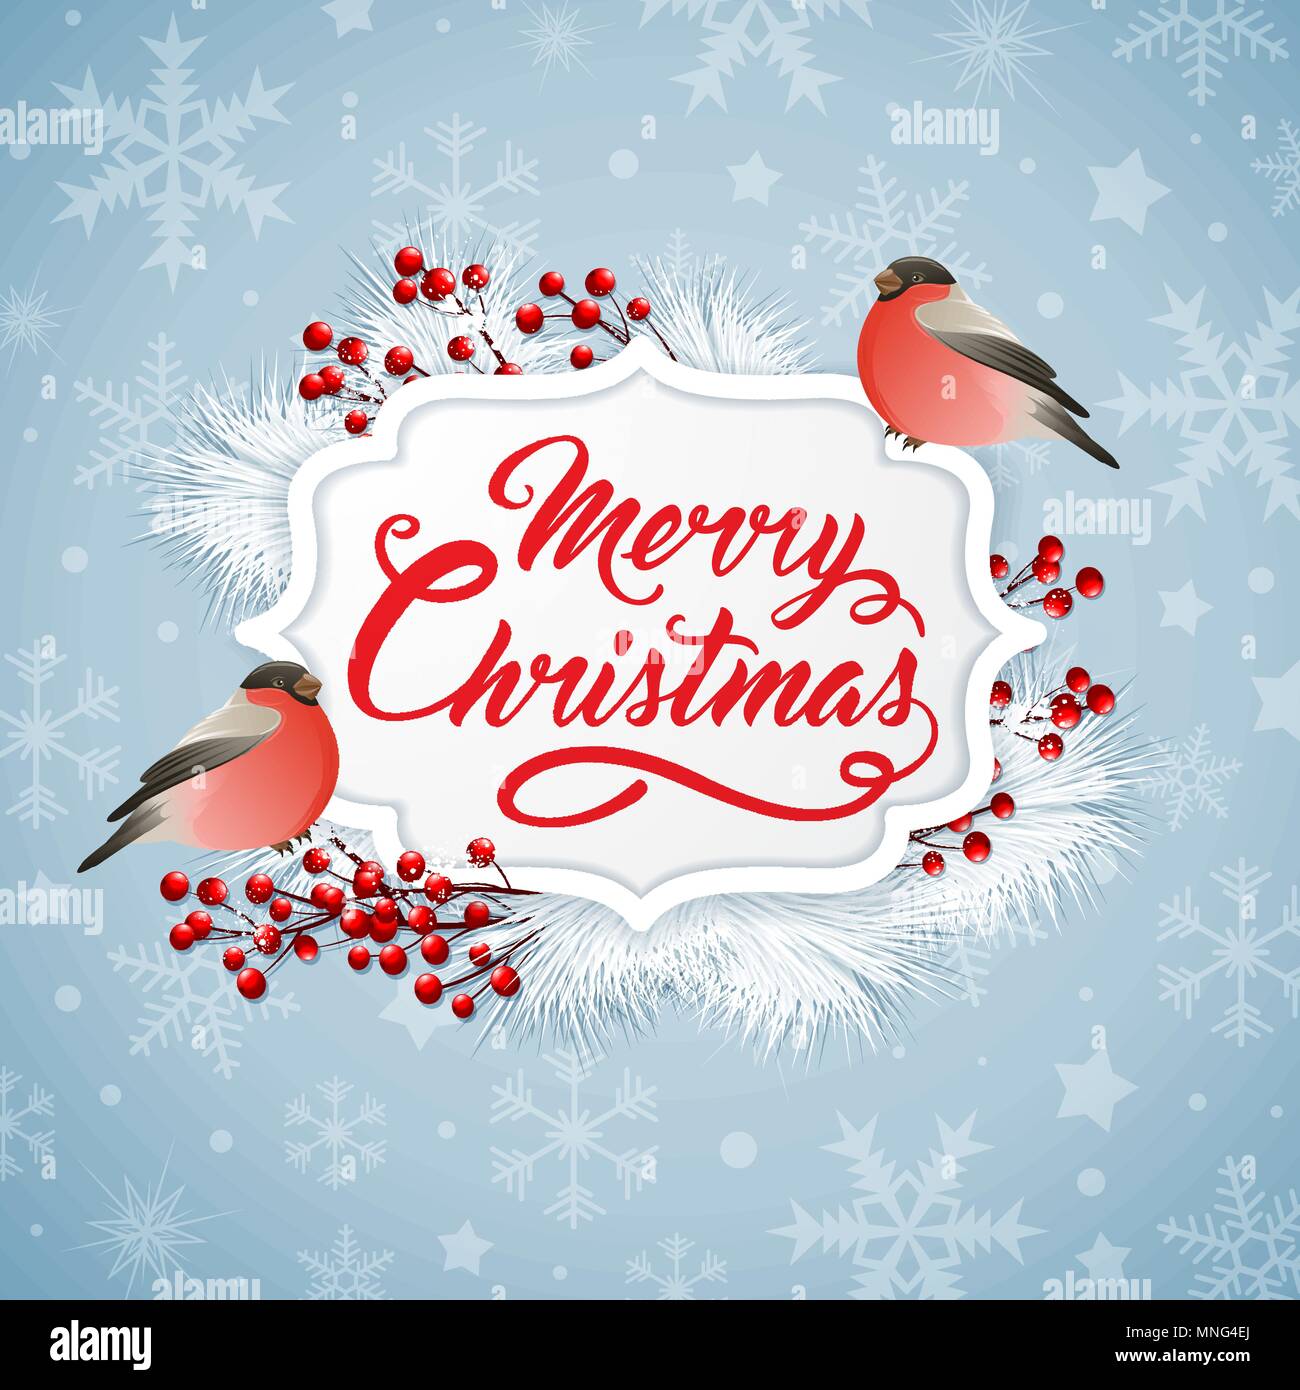 Vector Christmas banner with two bullfinches and greeting inscription. Merry Christmas lettering Stock Vector